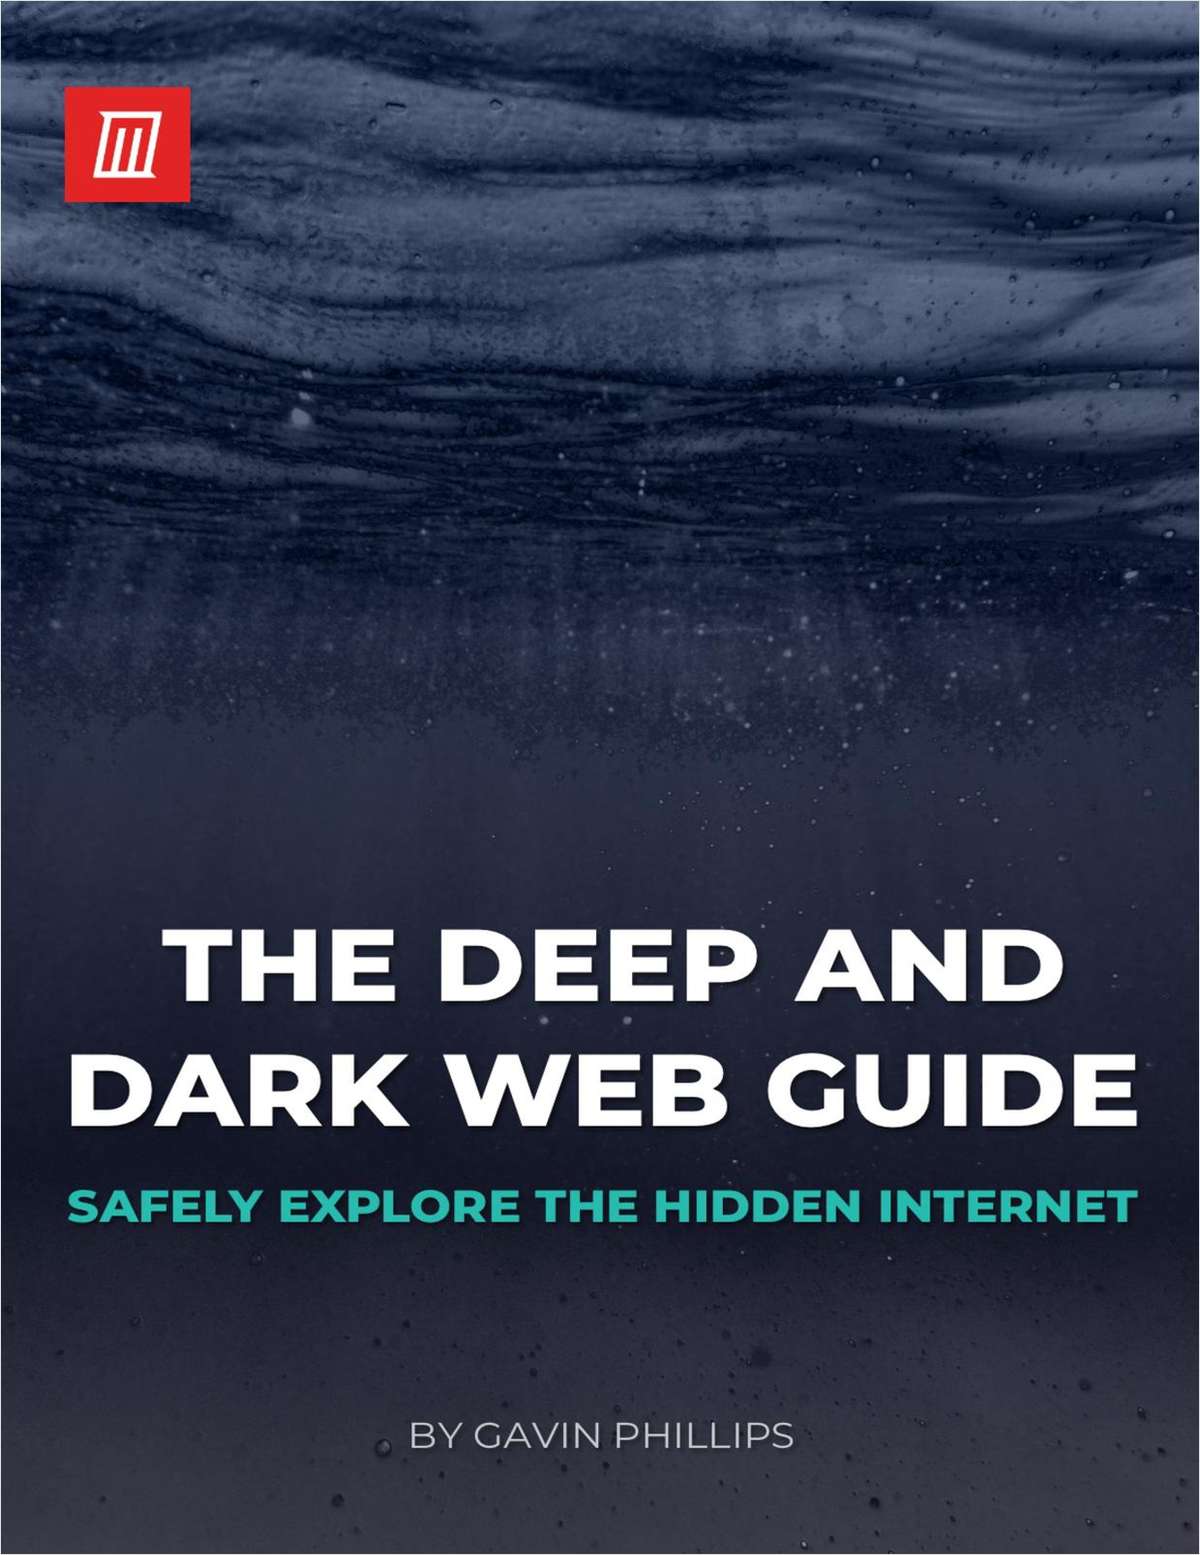 The Deep and Dark Web Guide